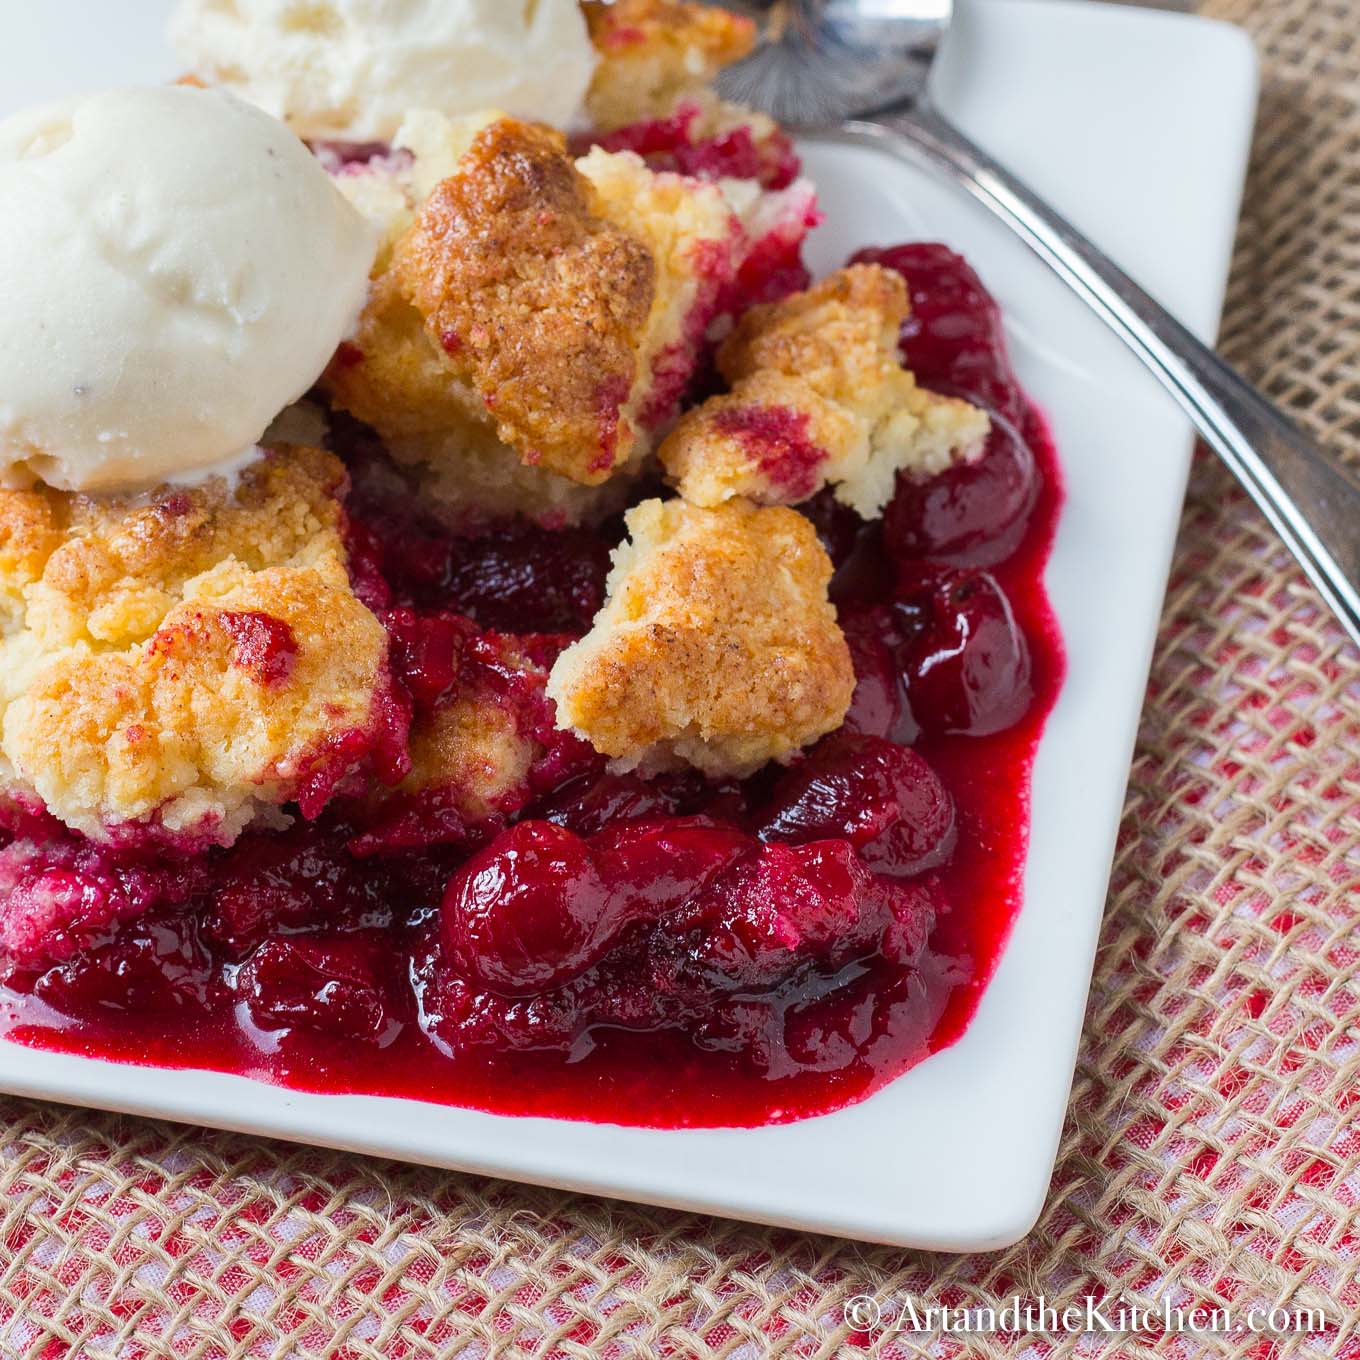 White plate filled with cherry cobbler, topped with scoop of ice cream.